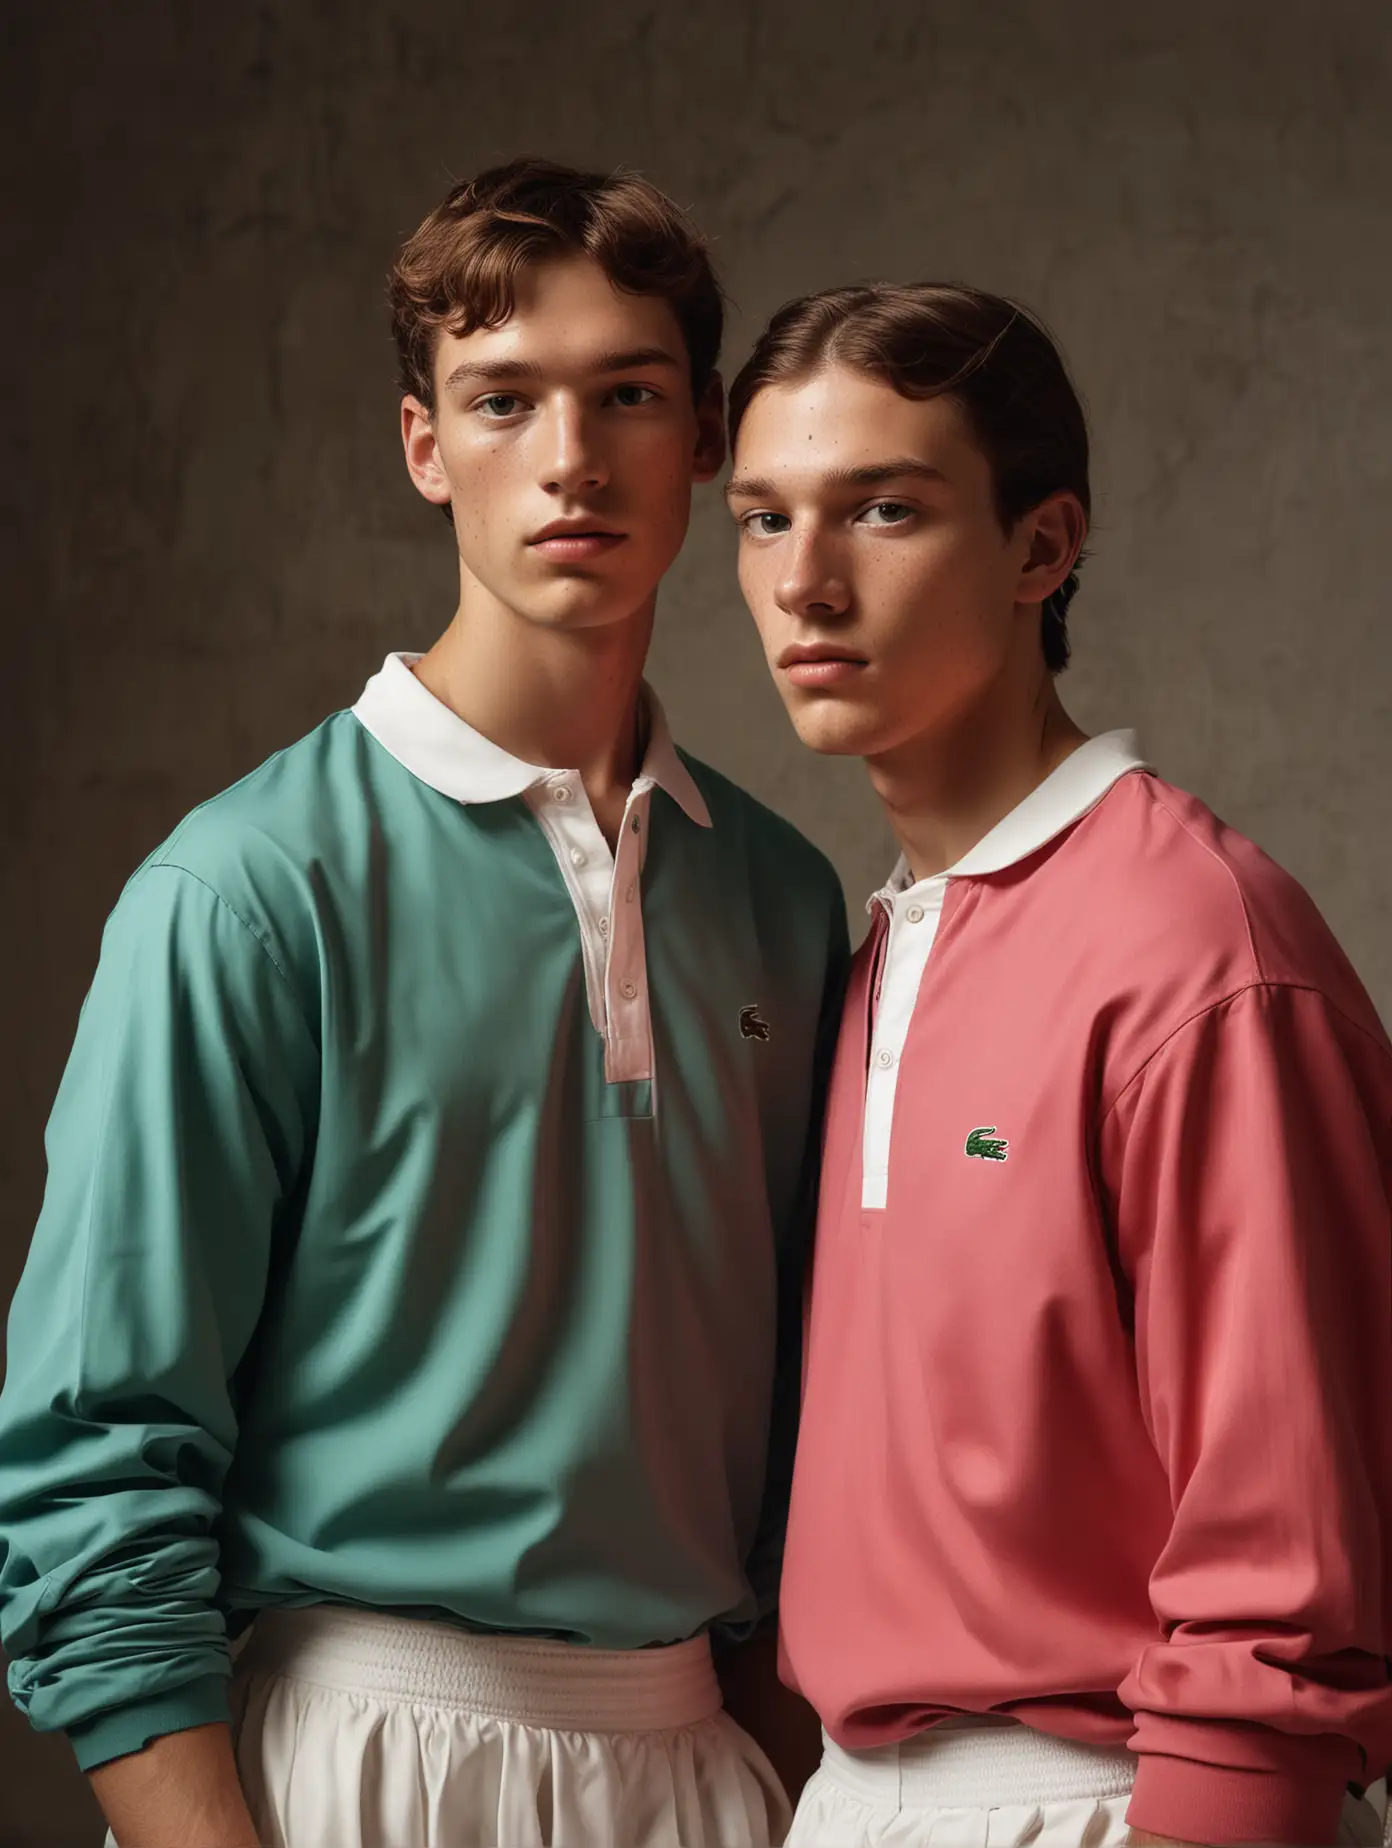 male models with freckels and semi dark skin is posing like in an old renaissance painting, models are wearing full lacoste outfits, tennis skirt, colorful clothes, models are floating 